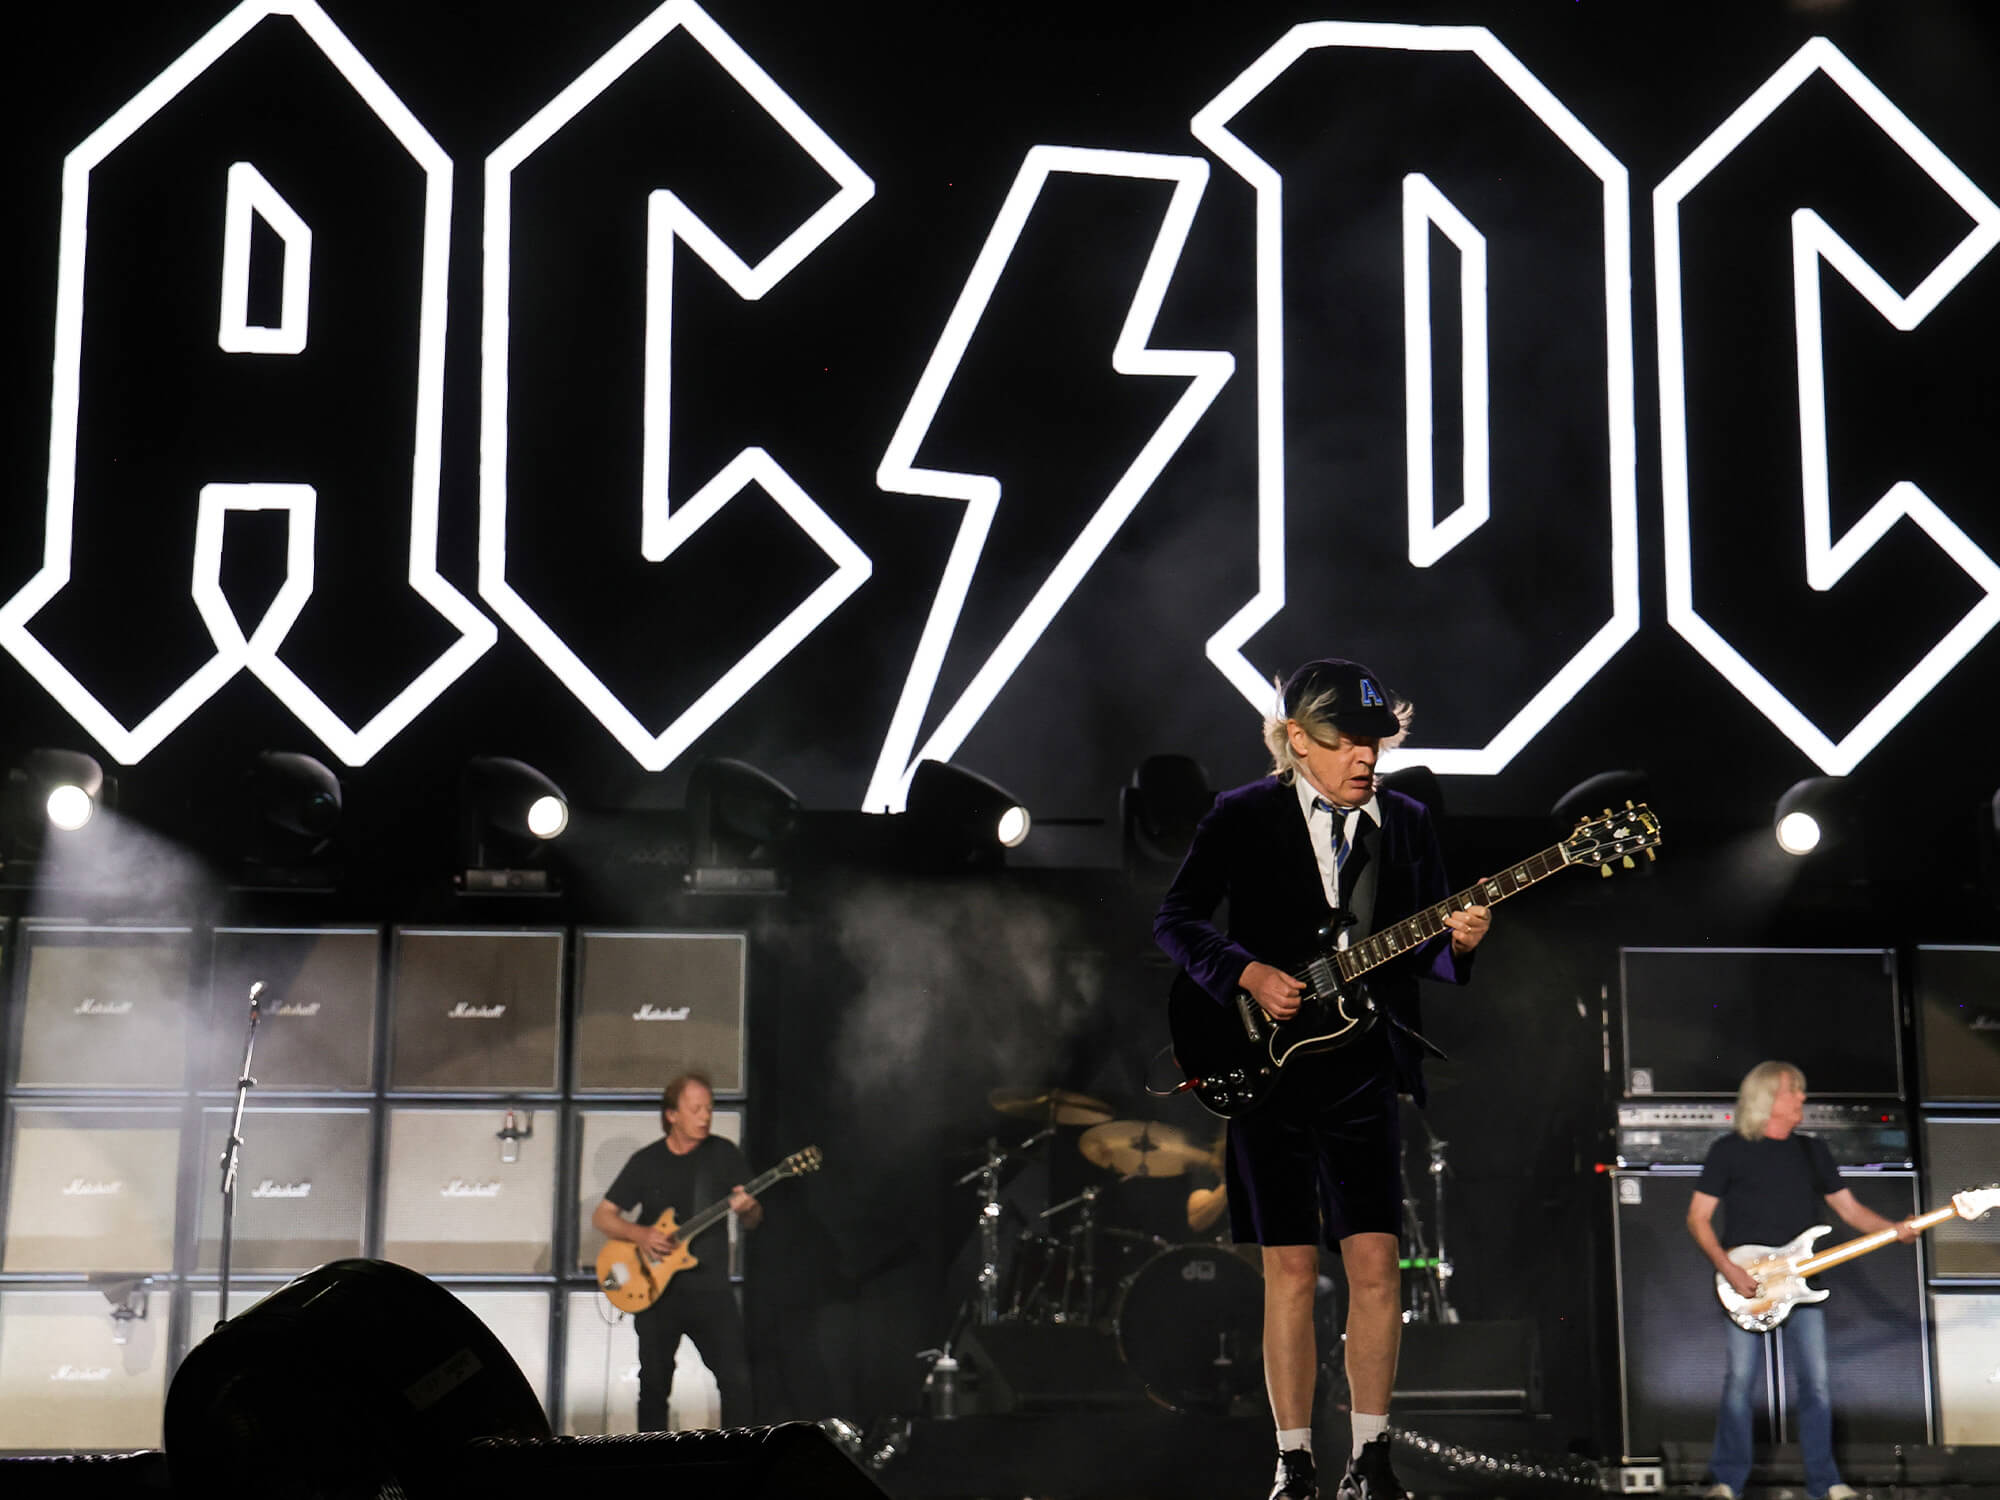 AC/DC at the PowerTrip festival